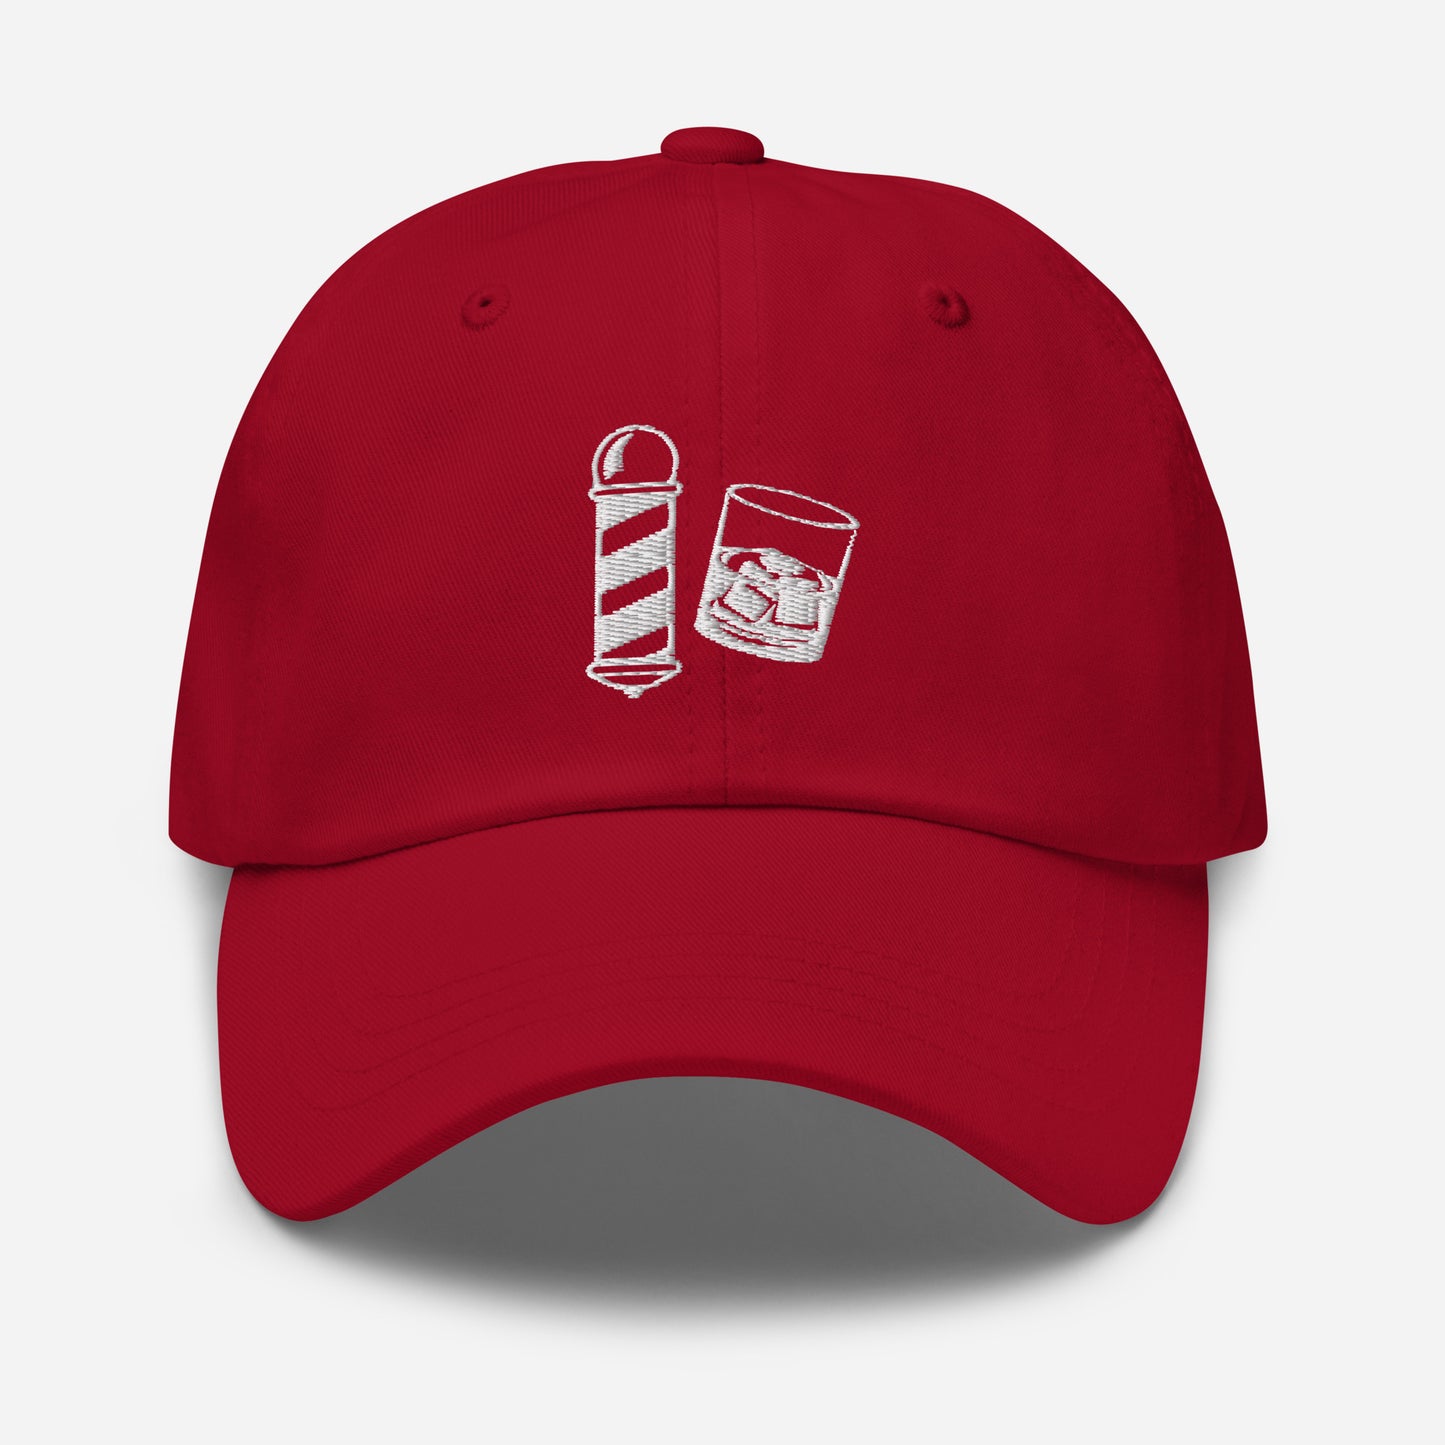 Barbershop & whiskey - Embroidered Dad hat